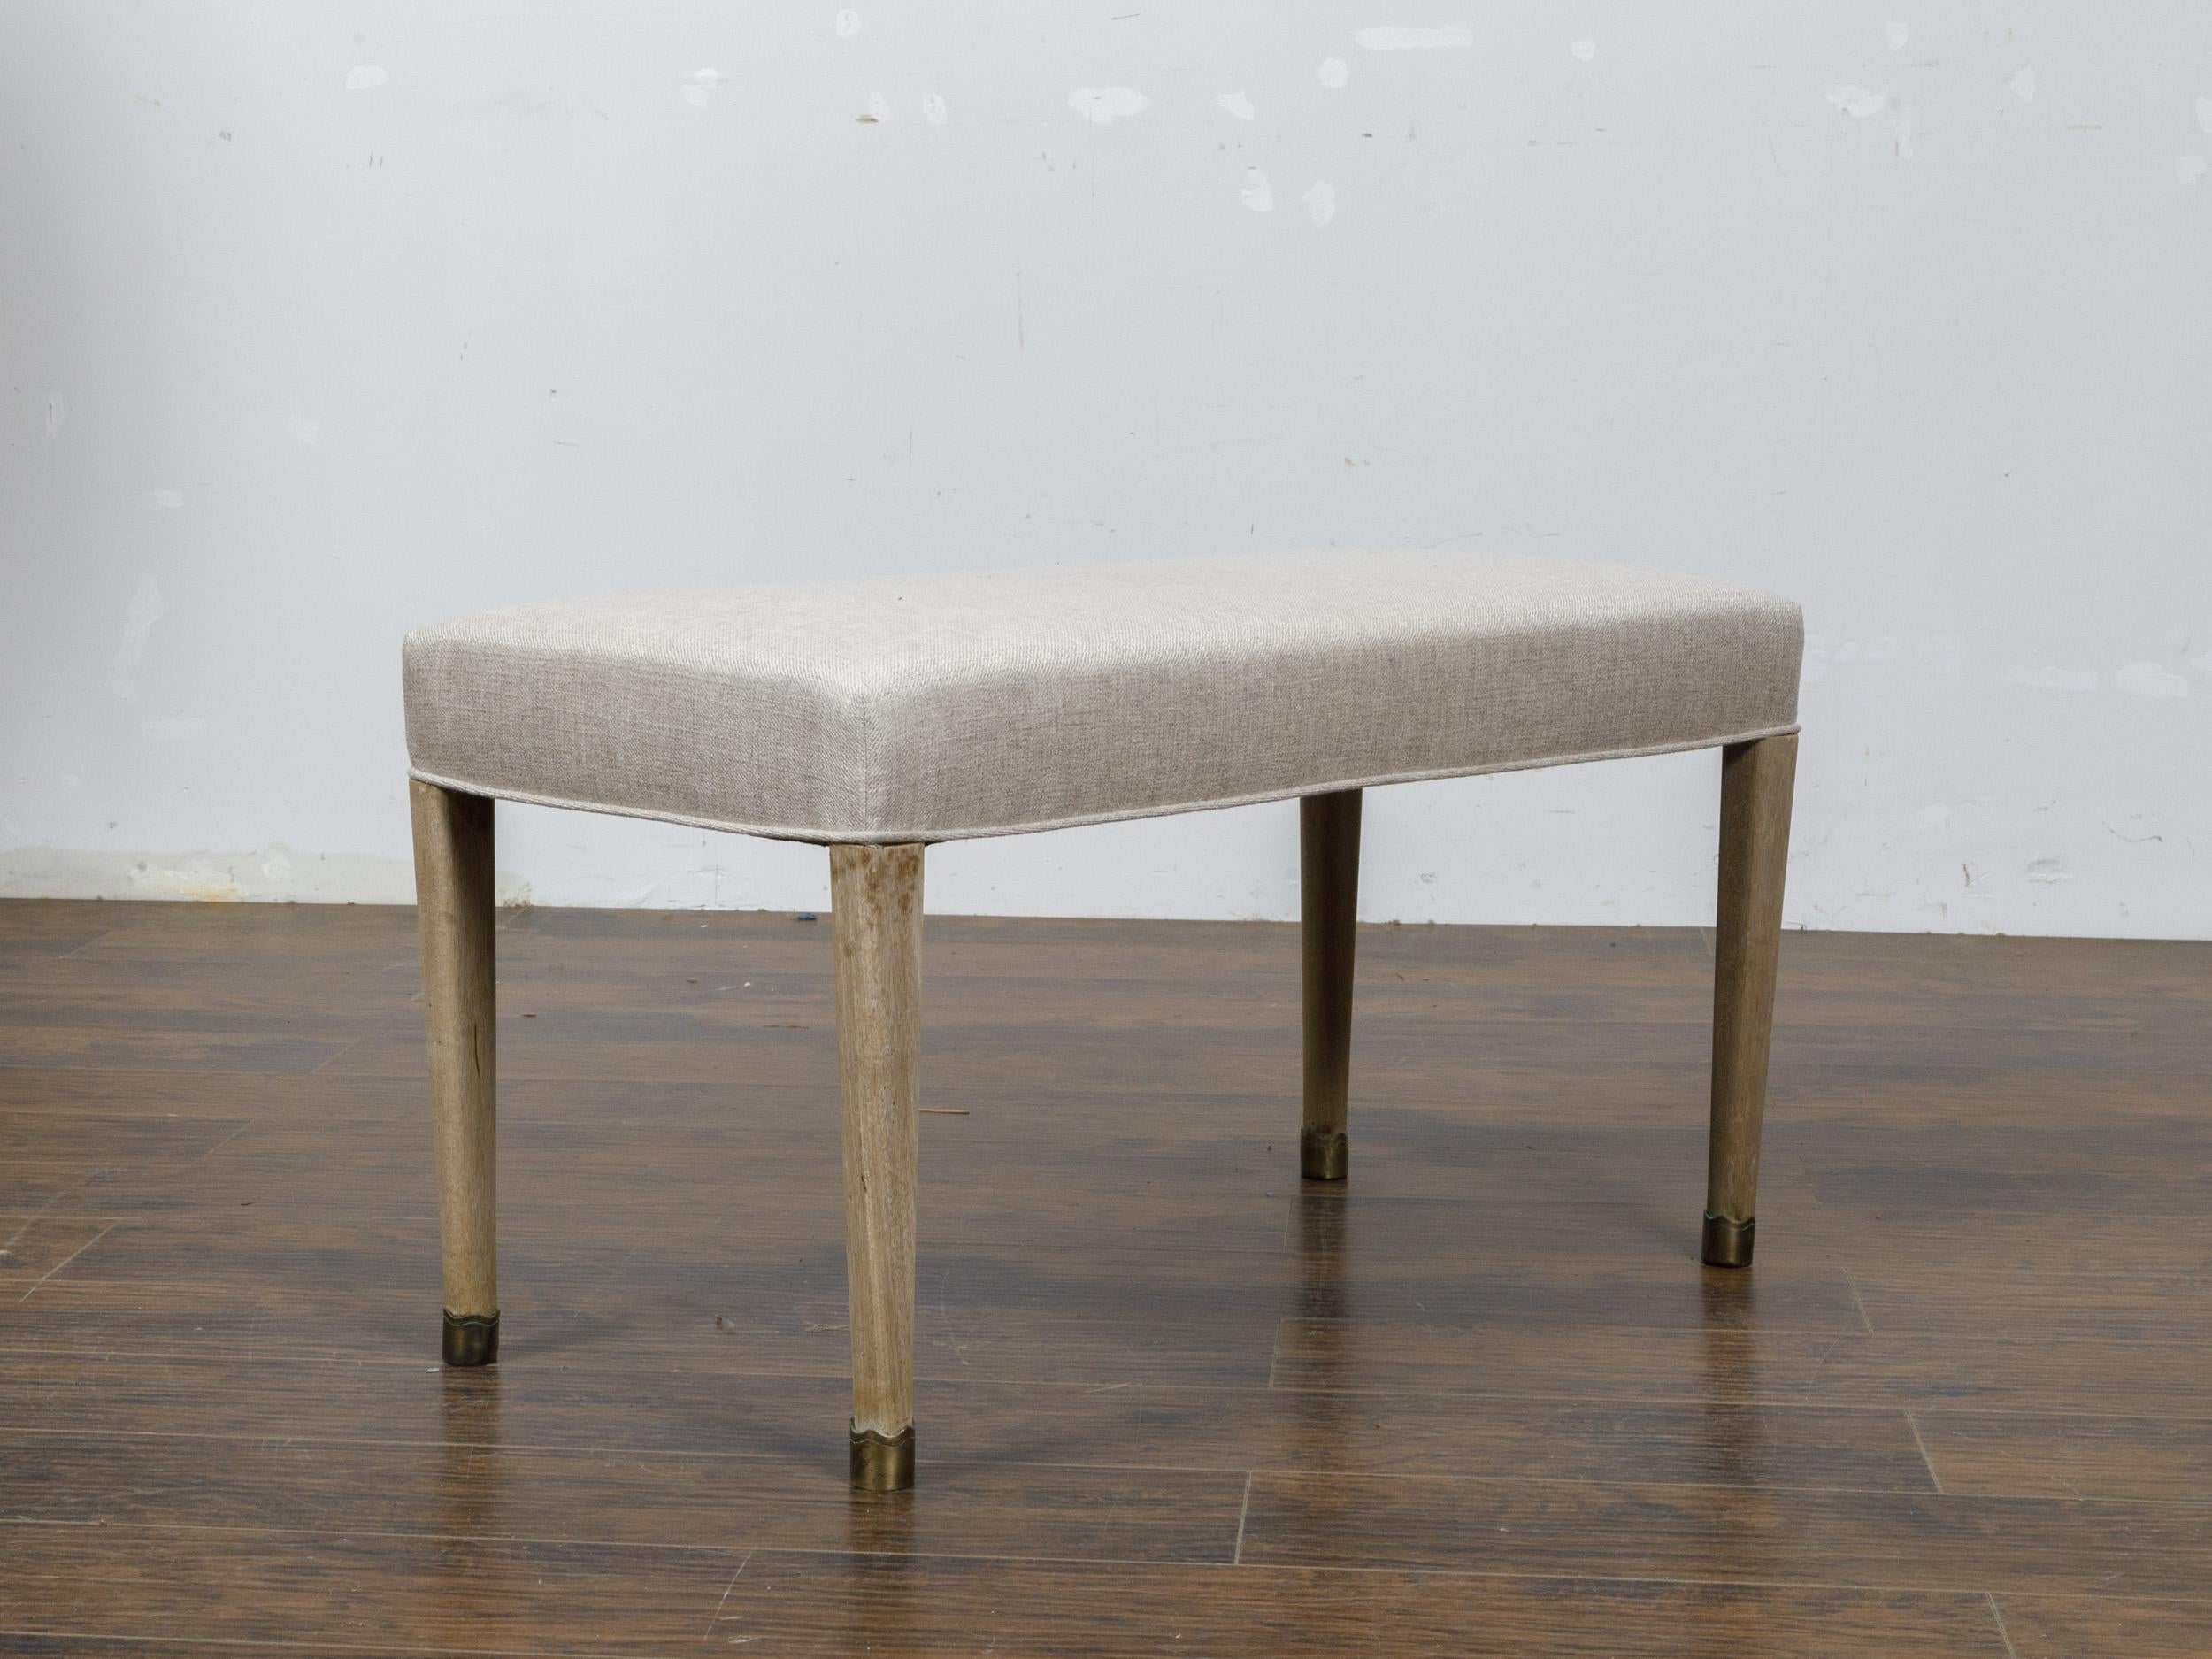 A French Art Deco bleached walnut bench from circa 1930 with brass feet and new custom linen upholstery. This exquisite French Art Deco bench, dating back to circa 1930, elegantly combines the timeless appeal of bleached walnut with contemporary